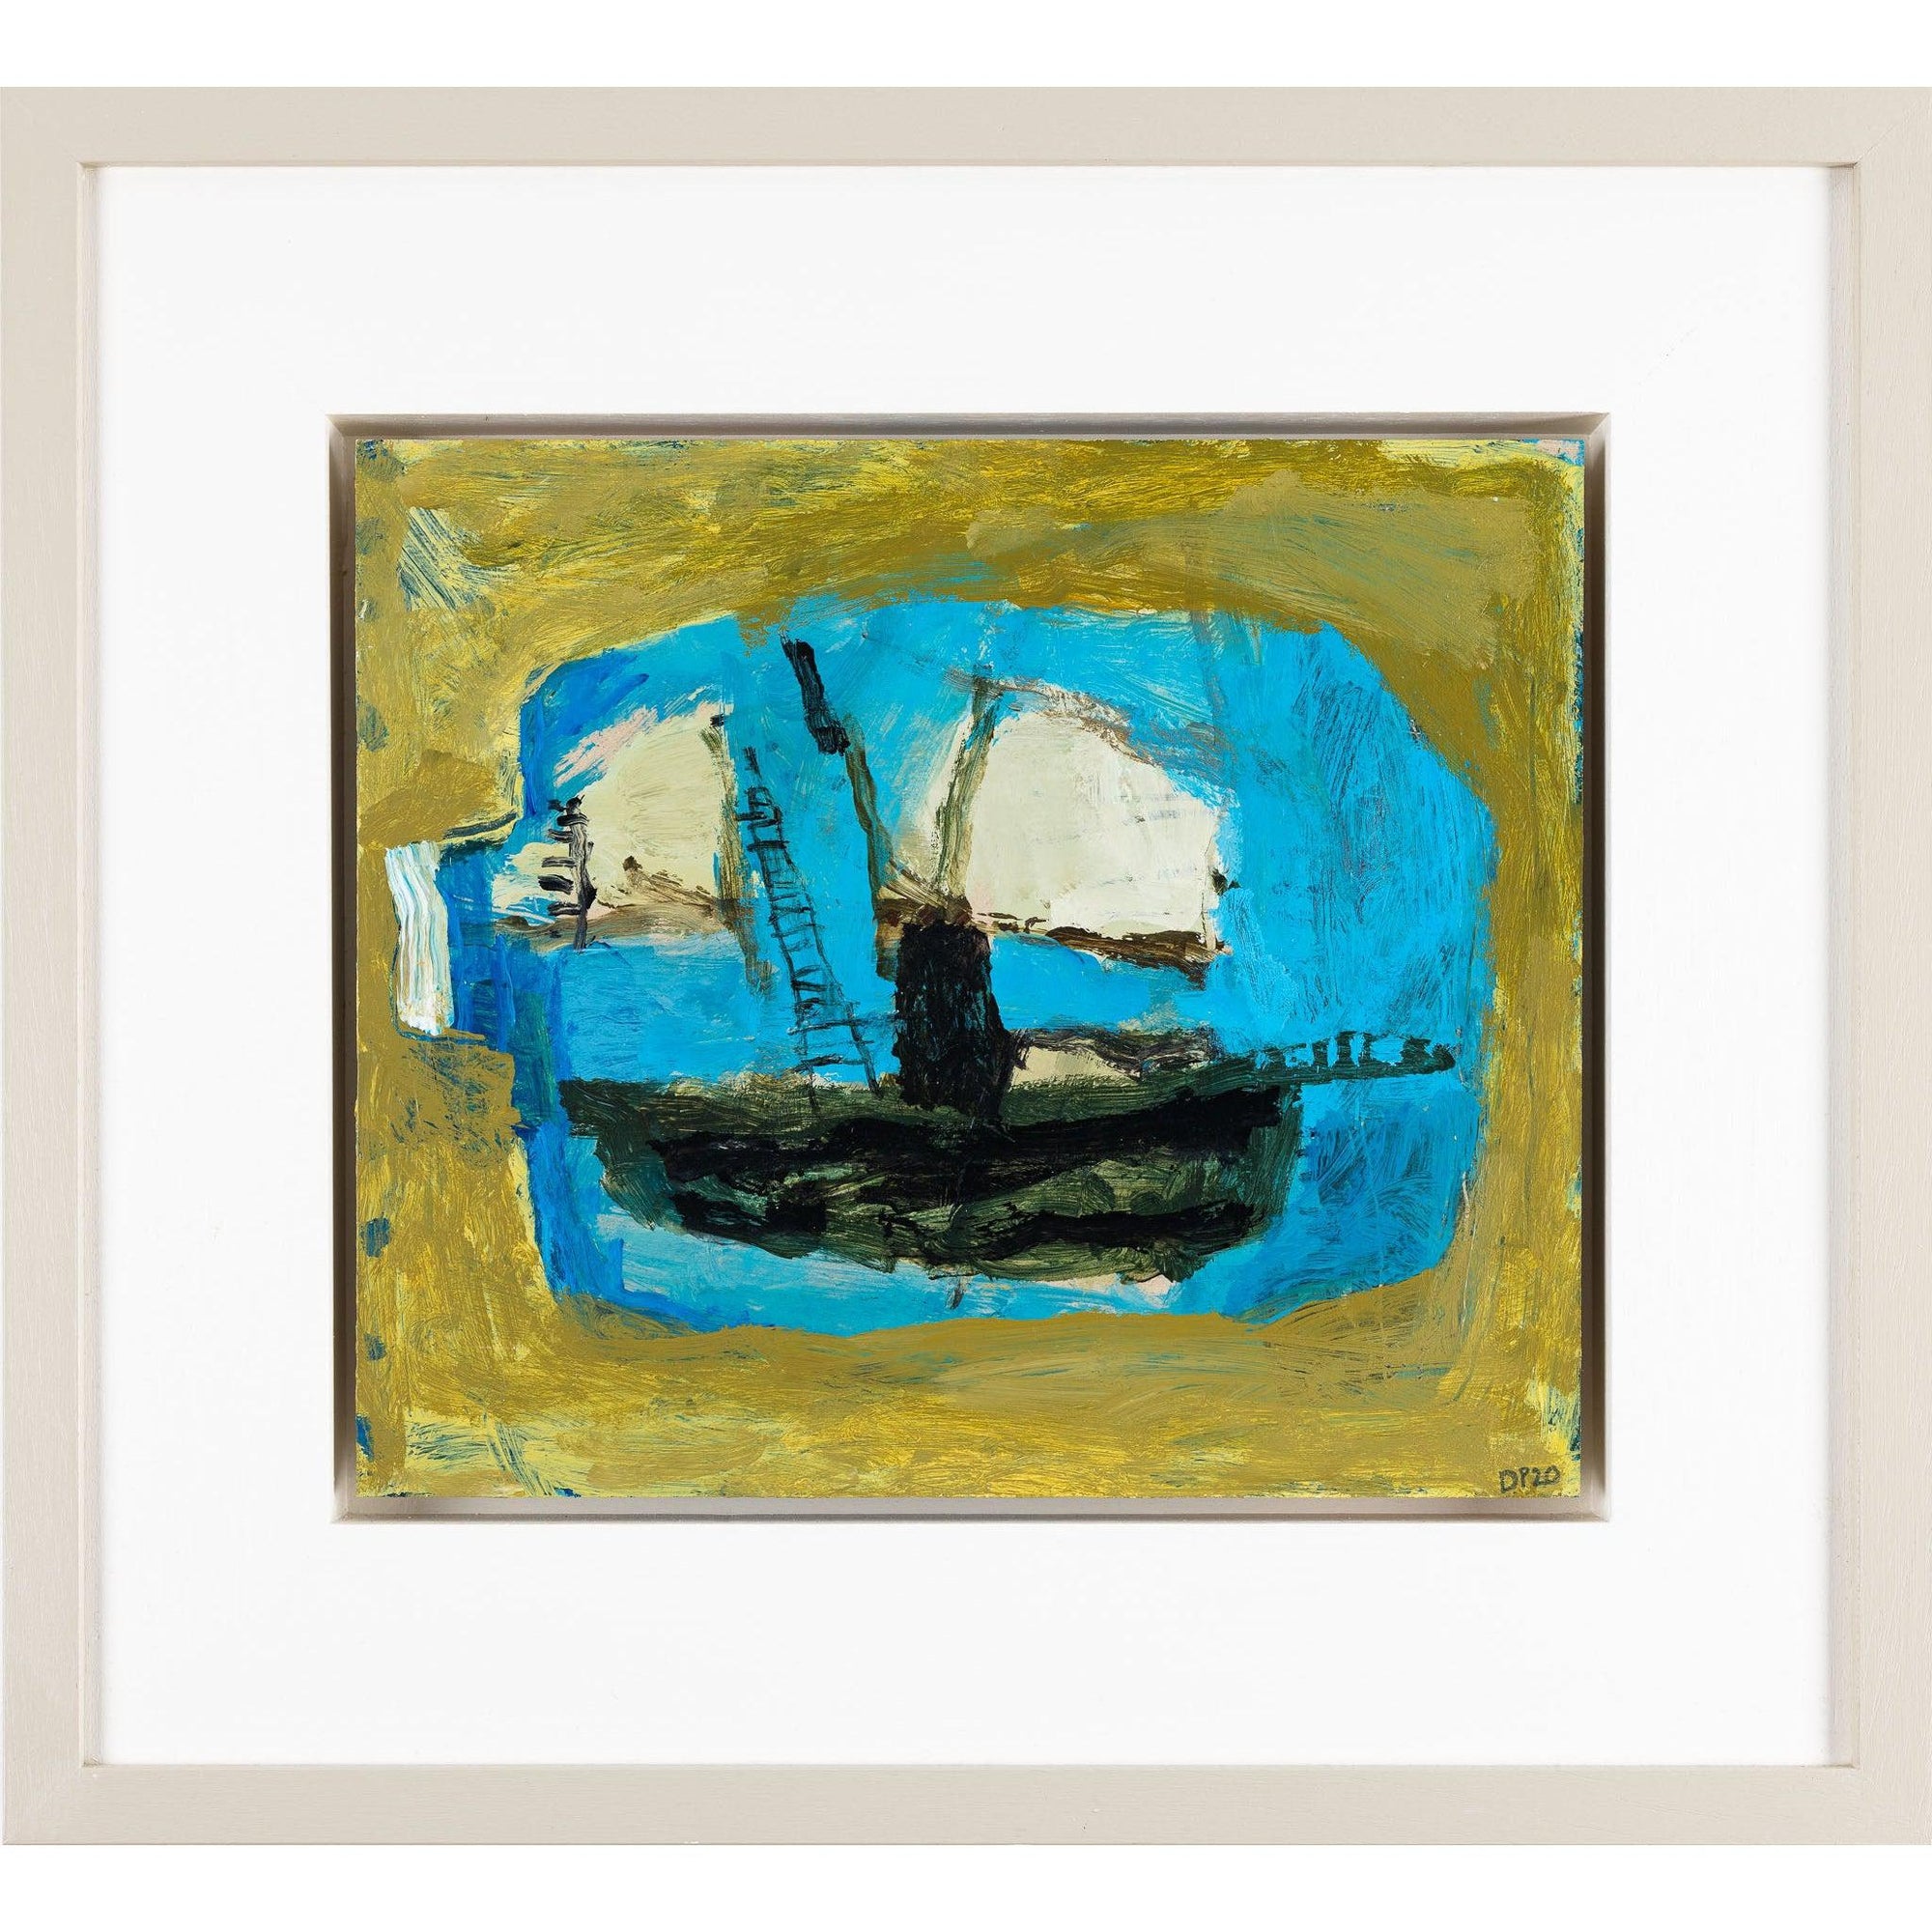 'Raise the Sails' mixed media original by David Pearce, available at Padstow Gallery, Cornwall